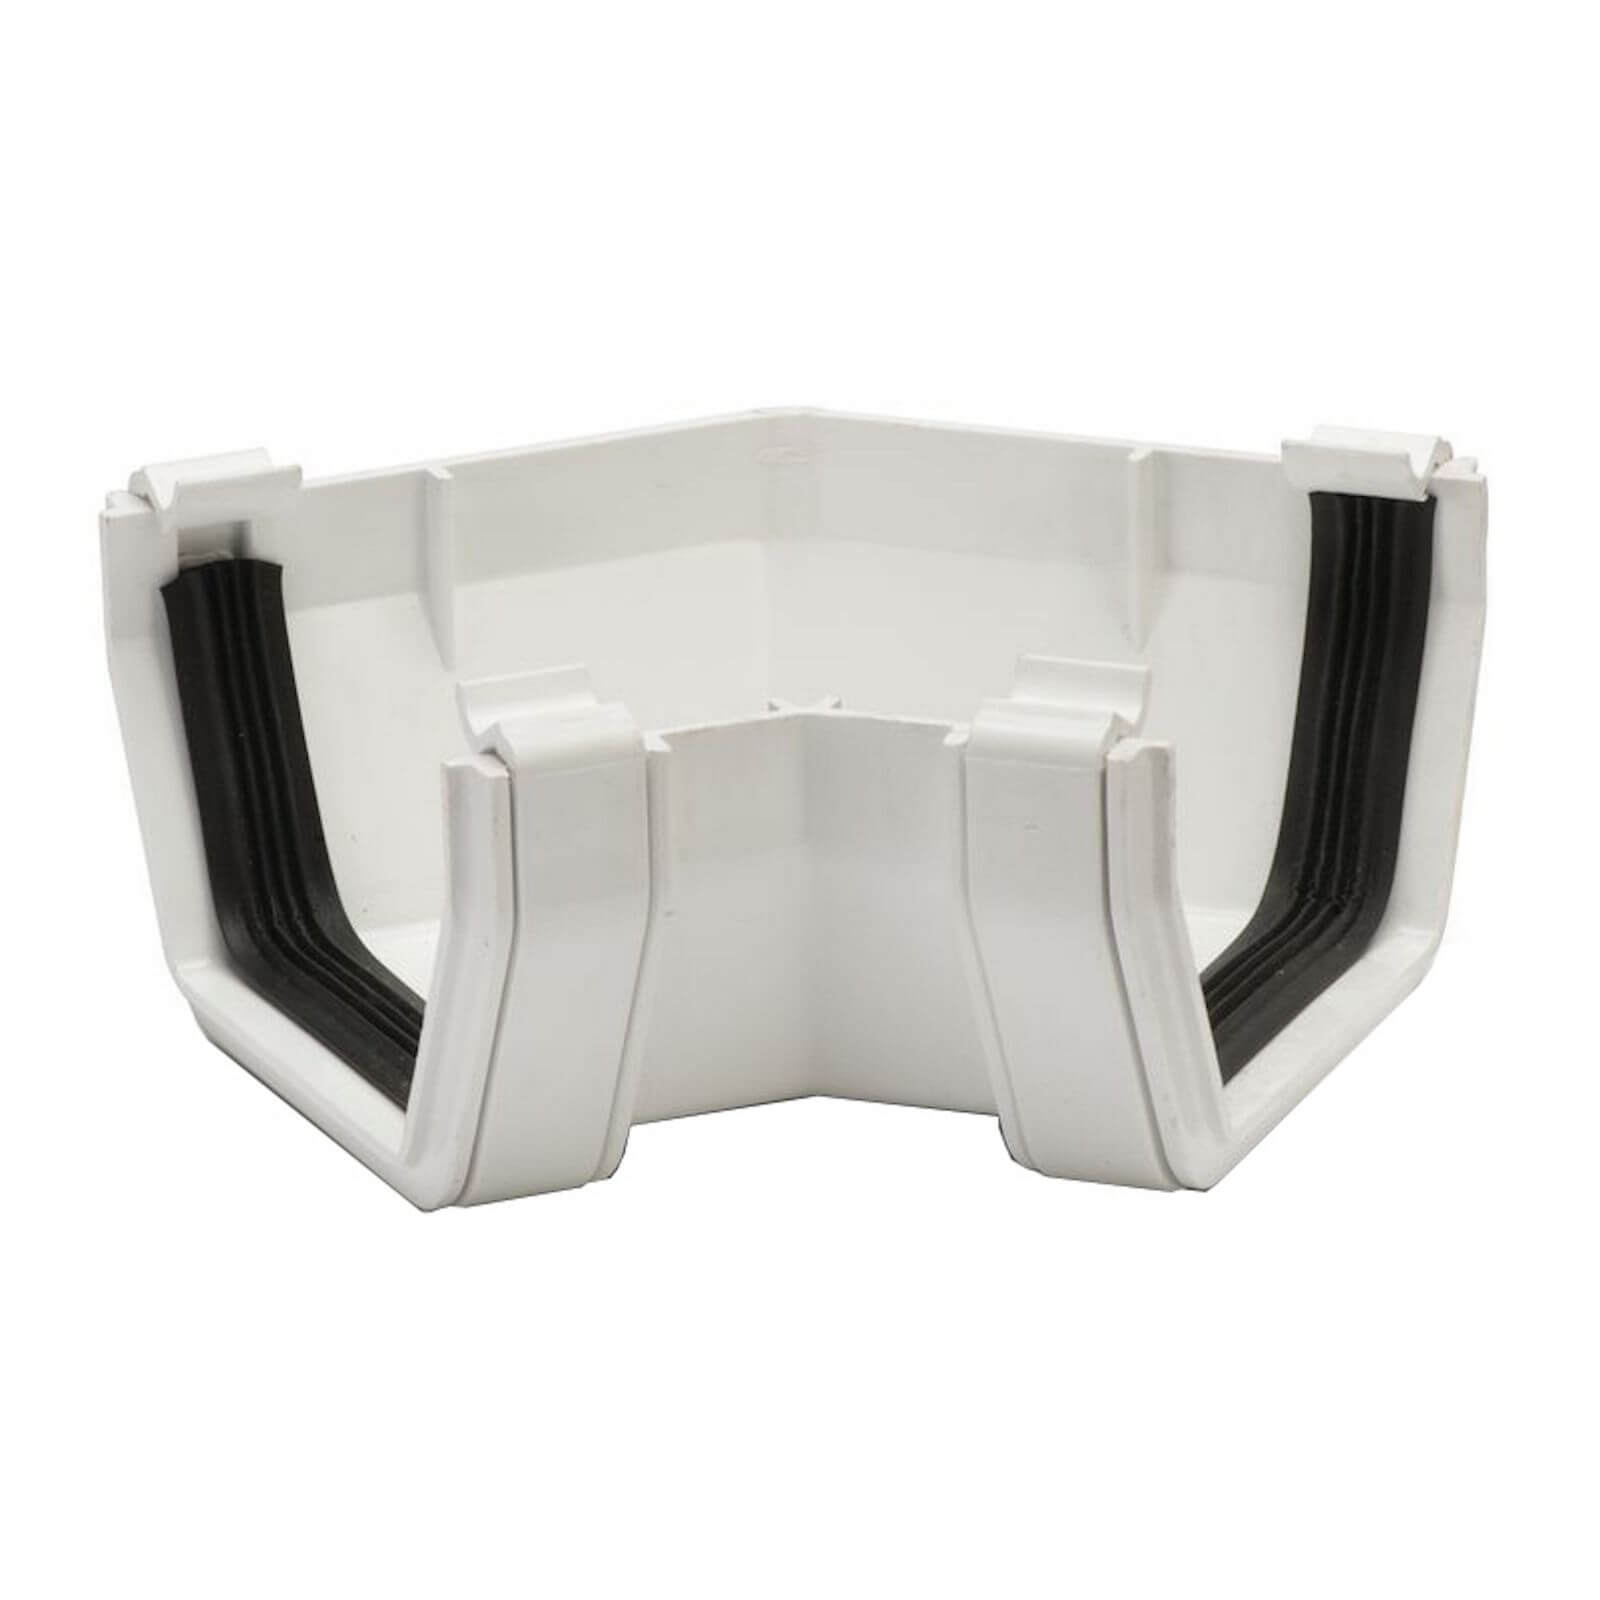 Polypipe Square Gutter Angle - 112mm x 135 Degree - White